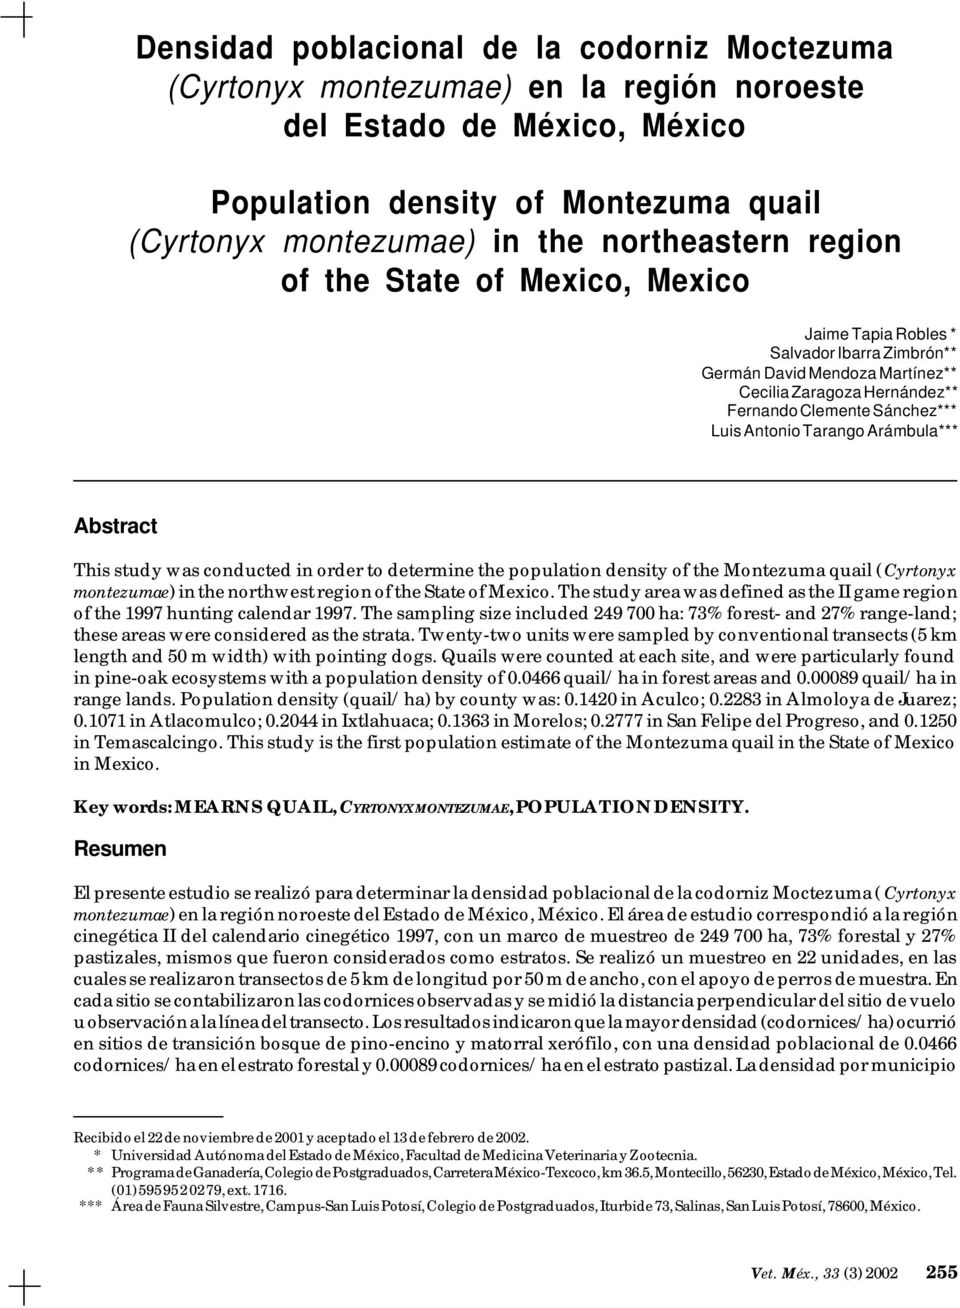 Arámbula*** Abstract This study was conducted in order to determine the population density of the Montezuma quail (Cyrtonyx montezumae) in the northwest region of the State of Mexico.